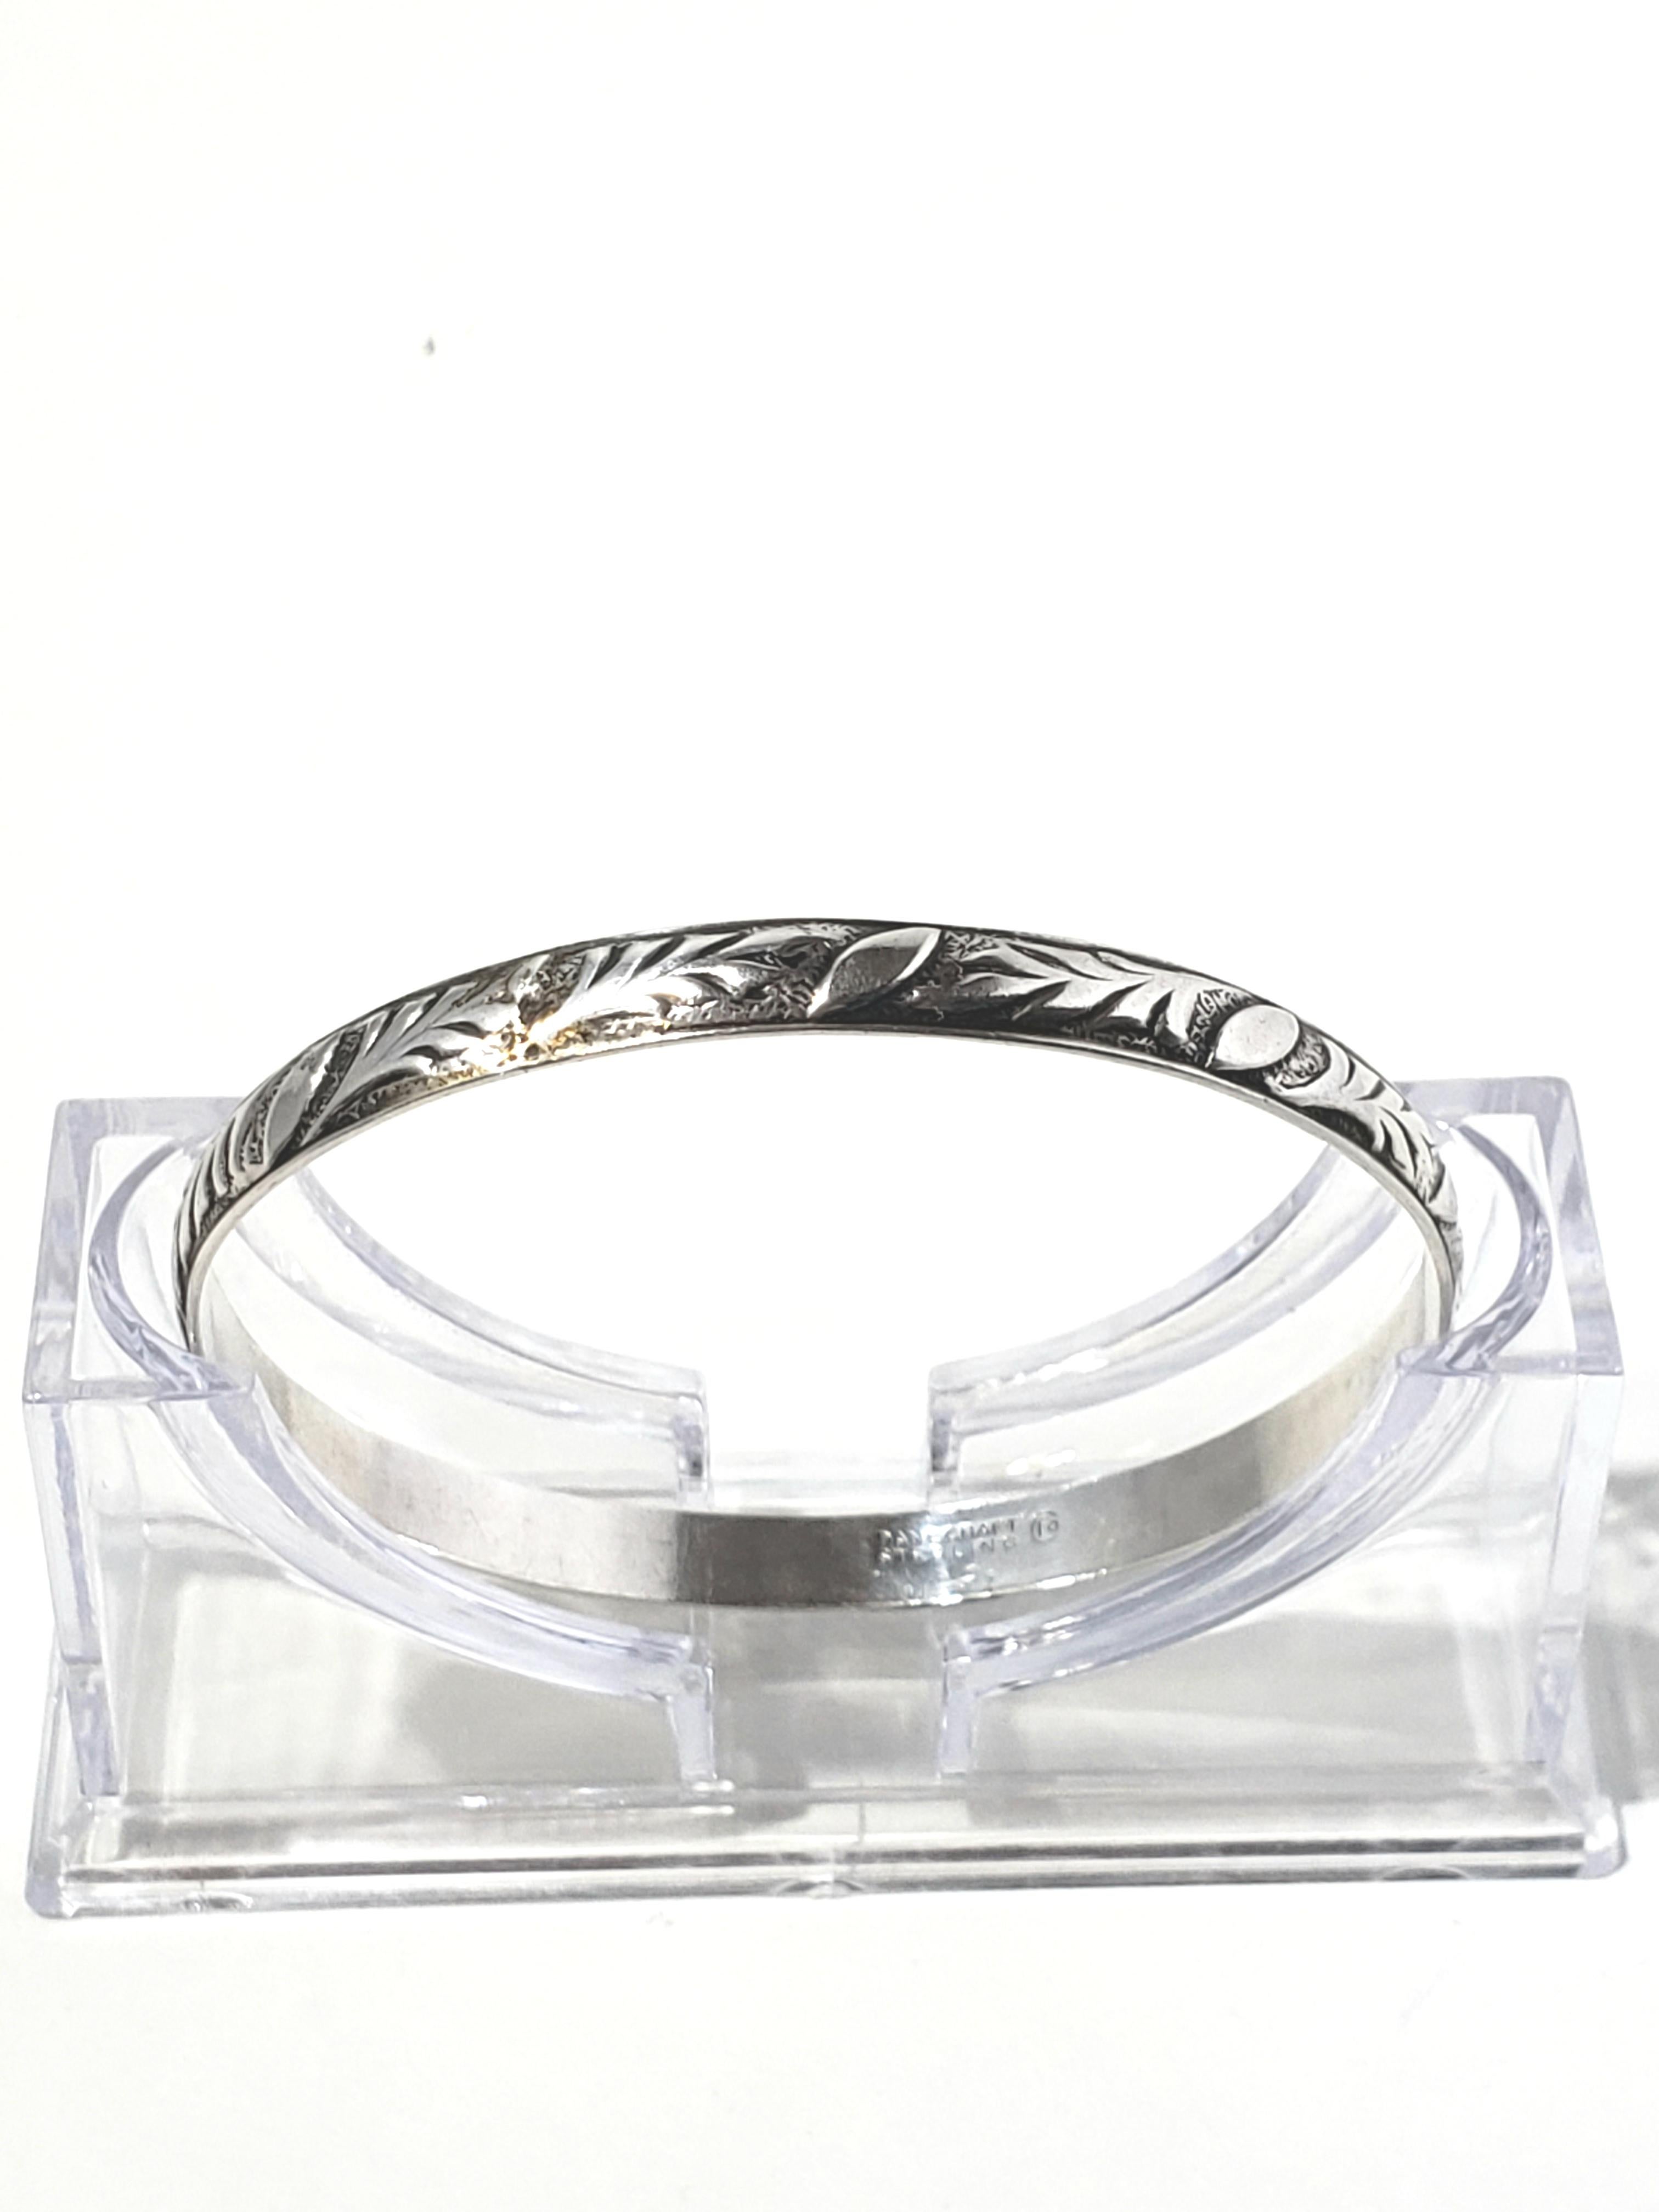 Danecraft Sterling Silver Raised Oak Leaves Bangle Bracelet

This is a beautiful sterling silver raised oak leaves bangle bracelet designed by Danecraft.

Measurements: Bracelet measure 7 and 3/4 inches and 1/4 inches in height.

Weight: 15.7 g /